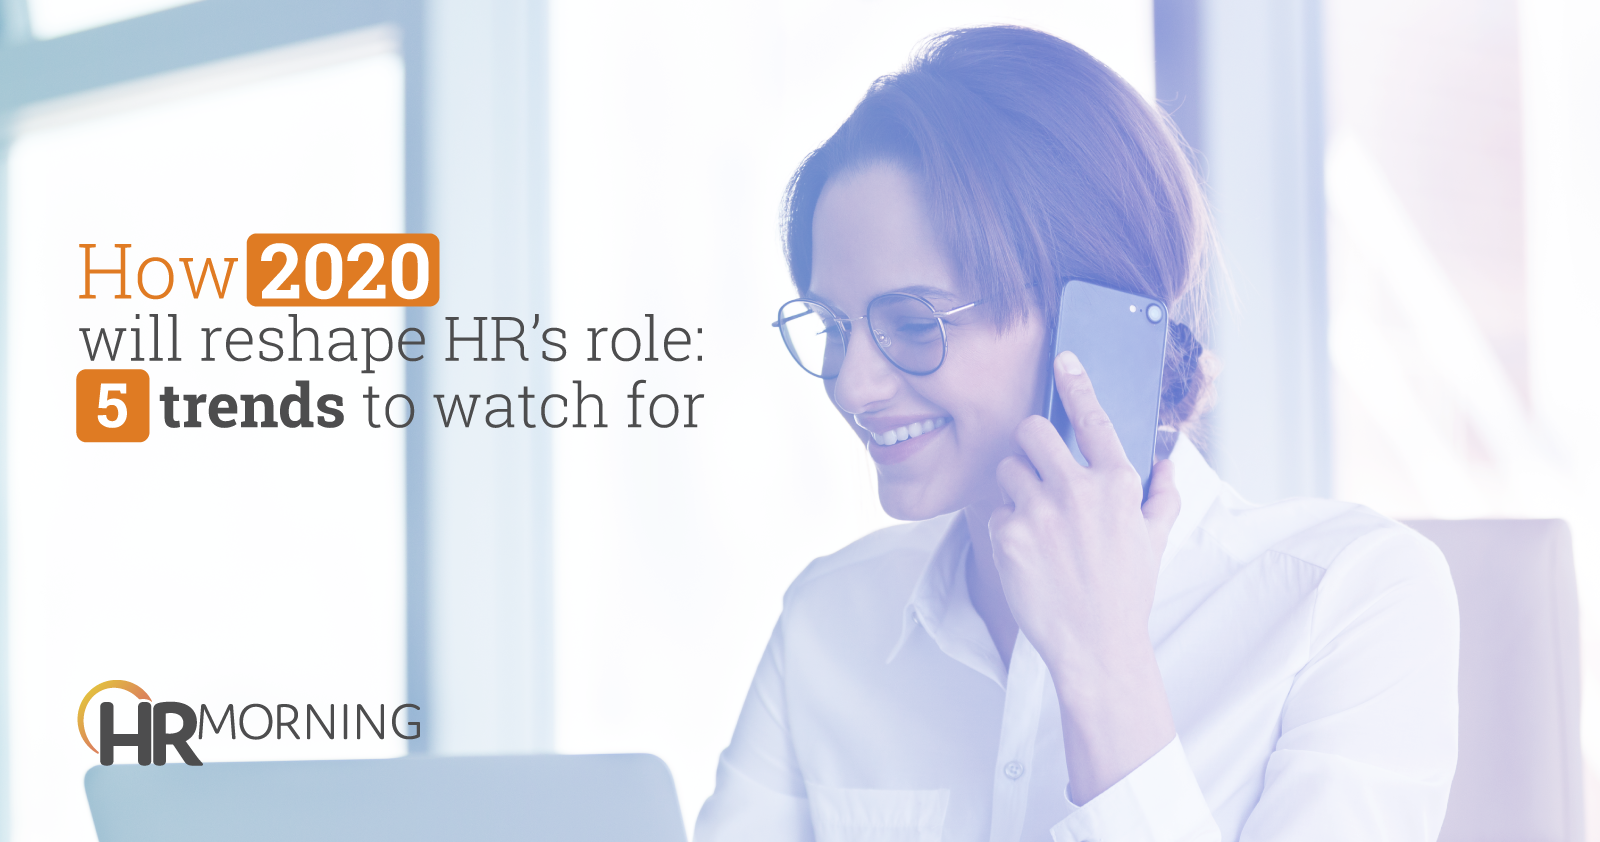 HR’s role, 5 trends